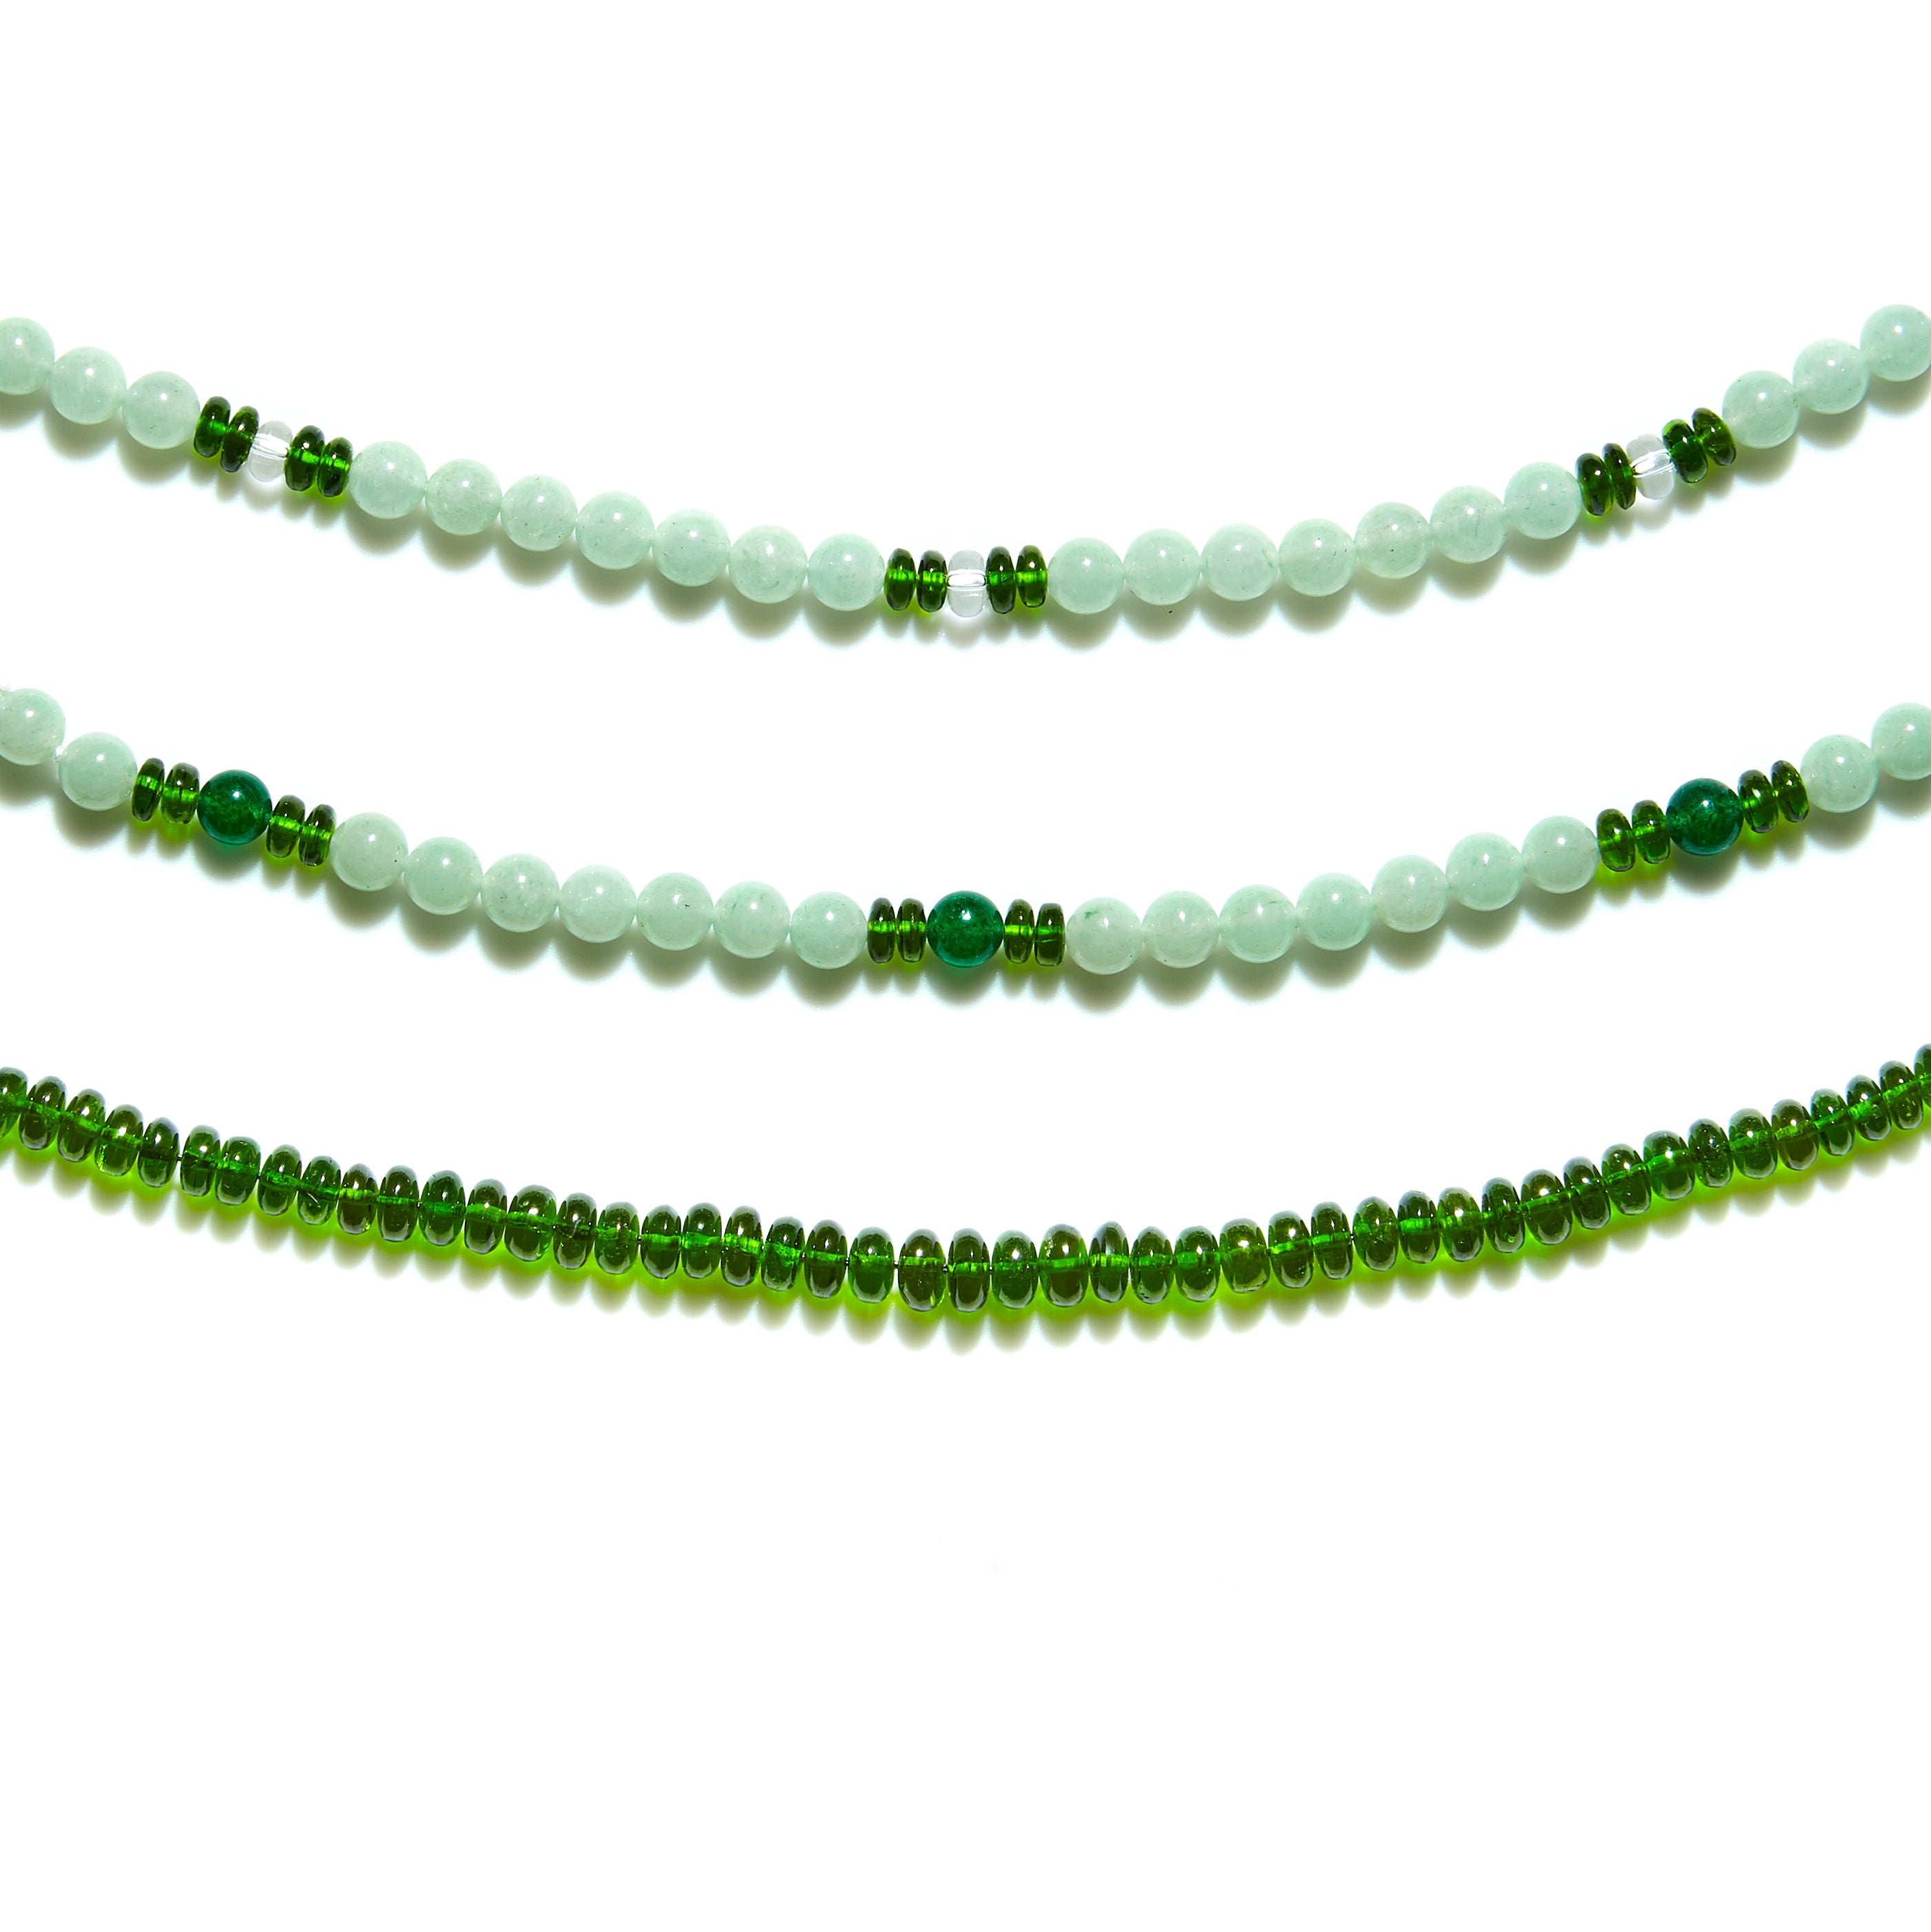 Three crystal healing necklaces with Chrome Diopside 